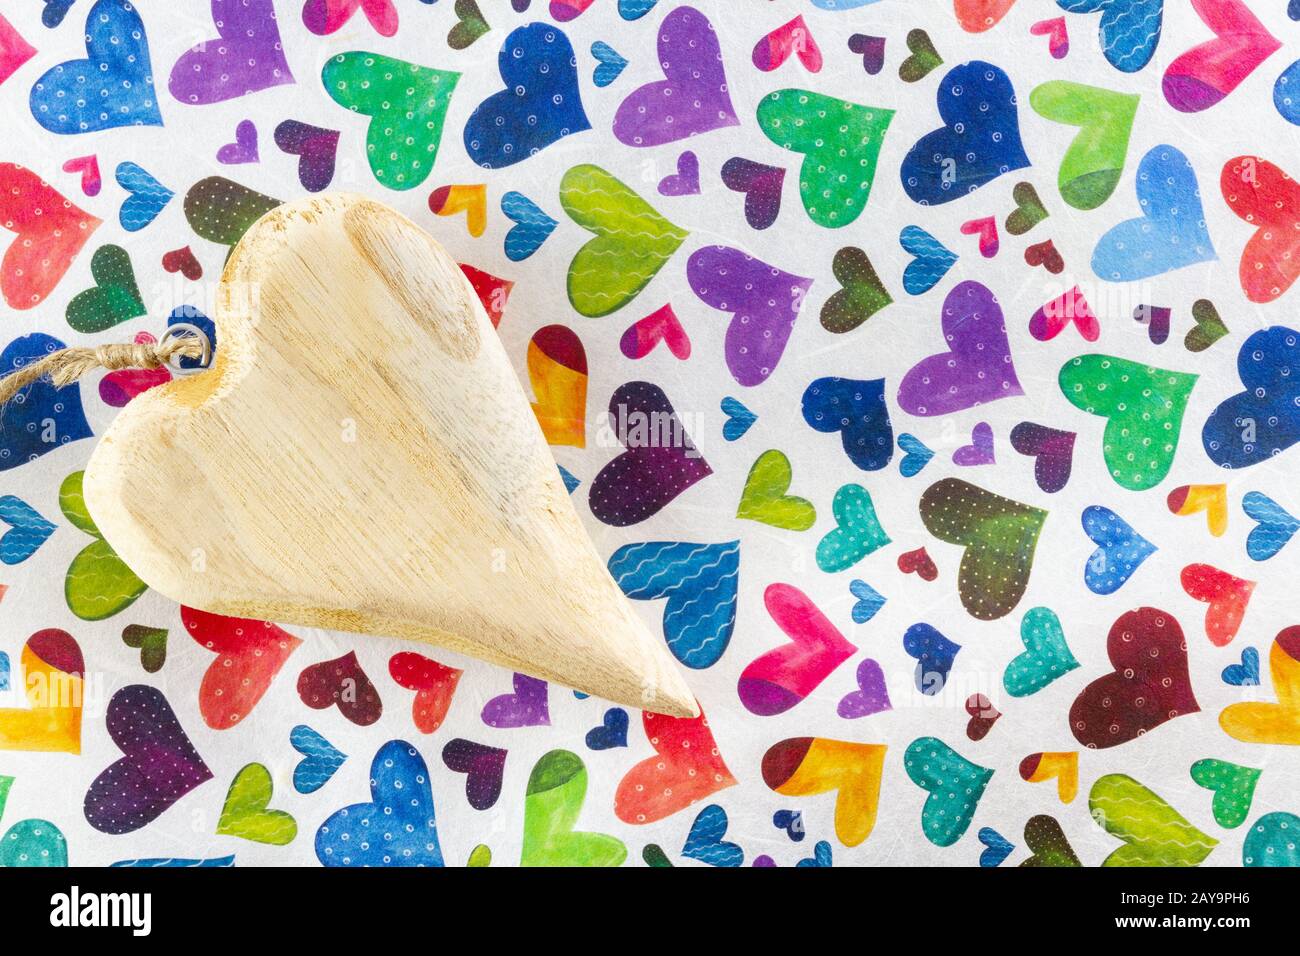 Wooden heart on paper containing hearts for Valentines Day Stock Photo